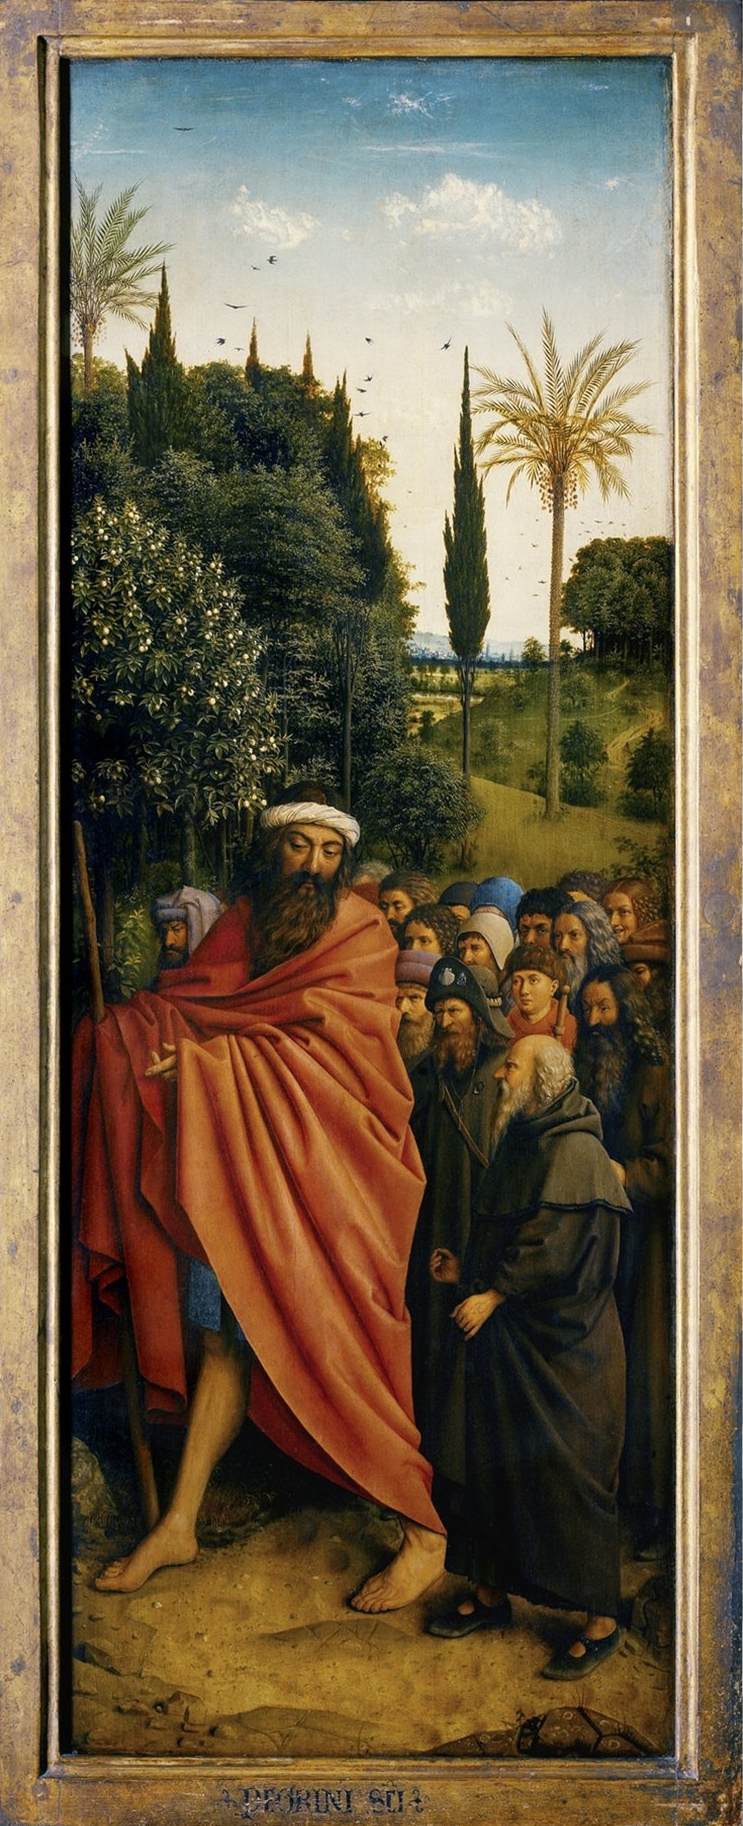 The Ghent Altarpiece: The Holy Pilgrims